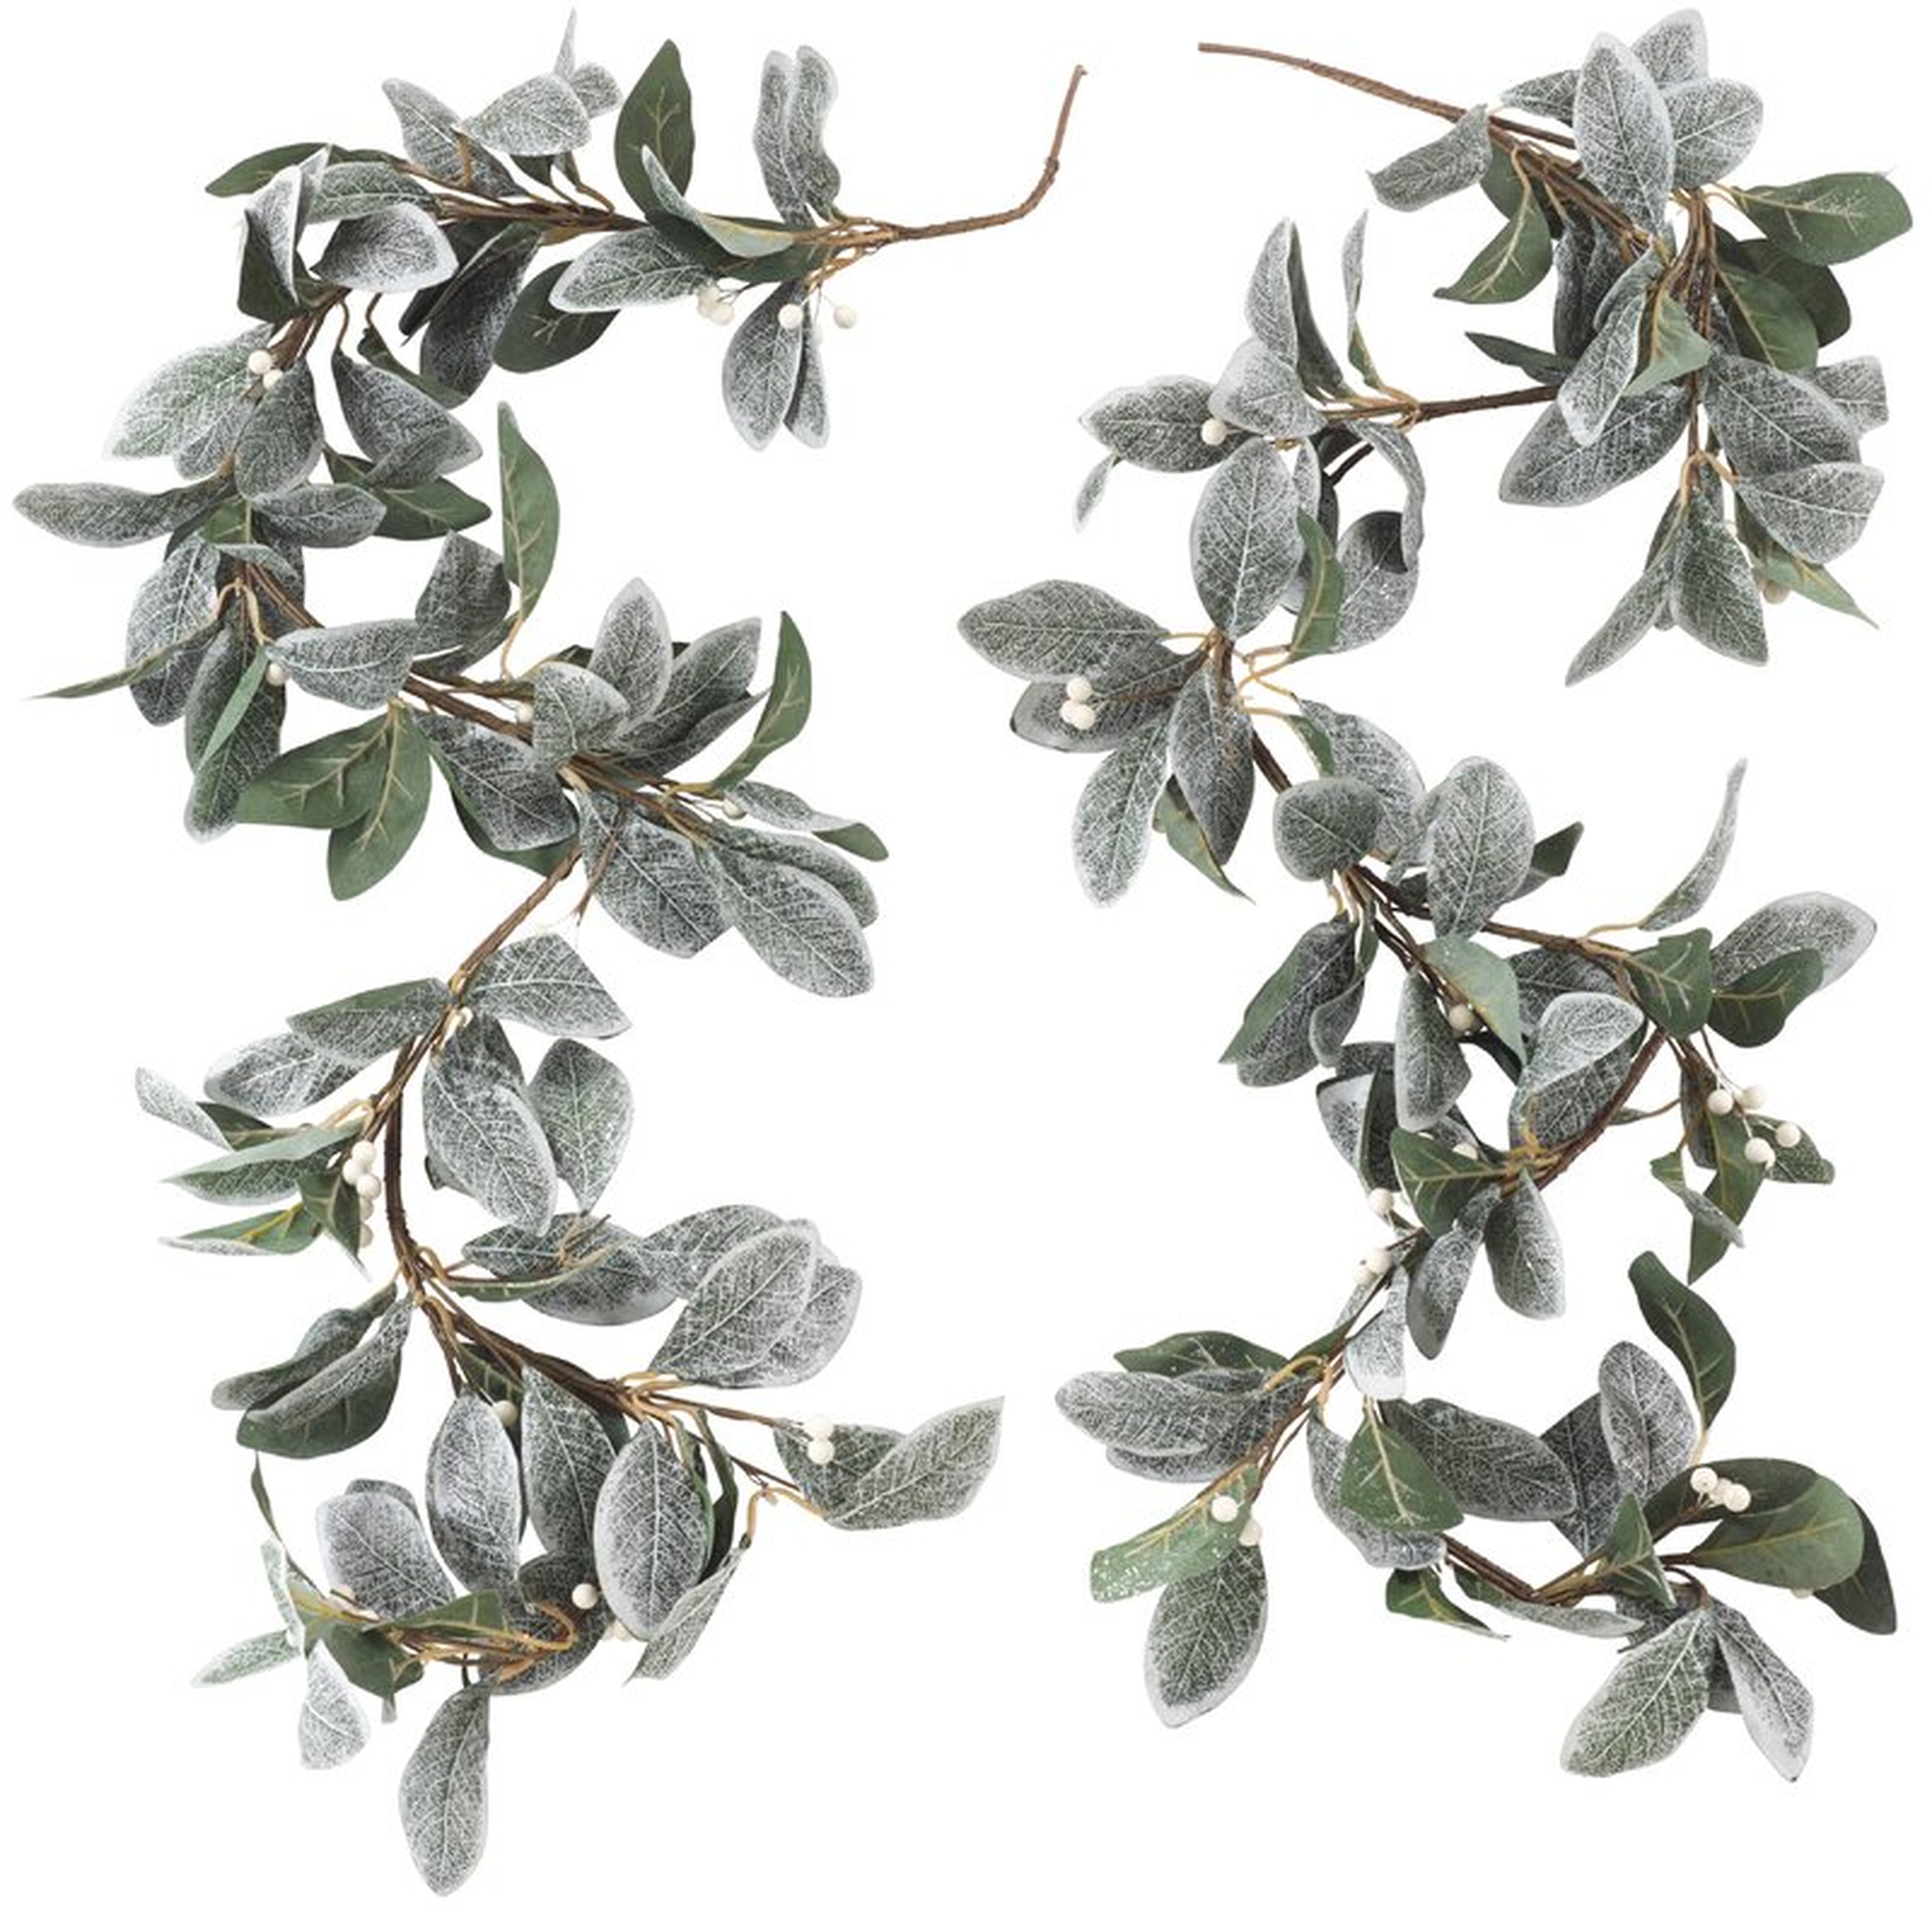 Cricklade Decorative Frosted Leaf Branch Garland See More from August Grove Shop - Wayfair